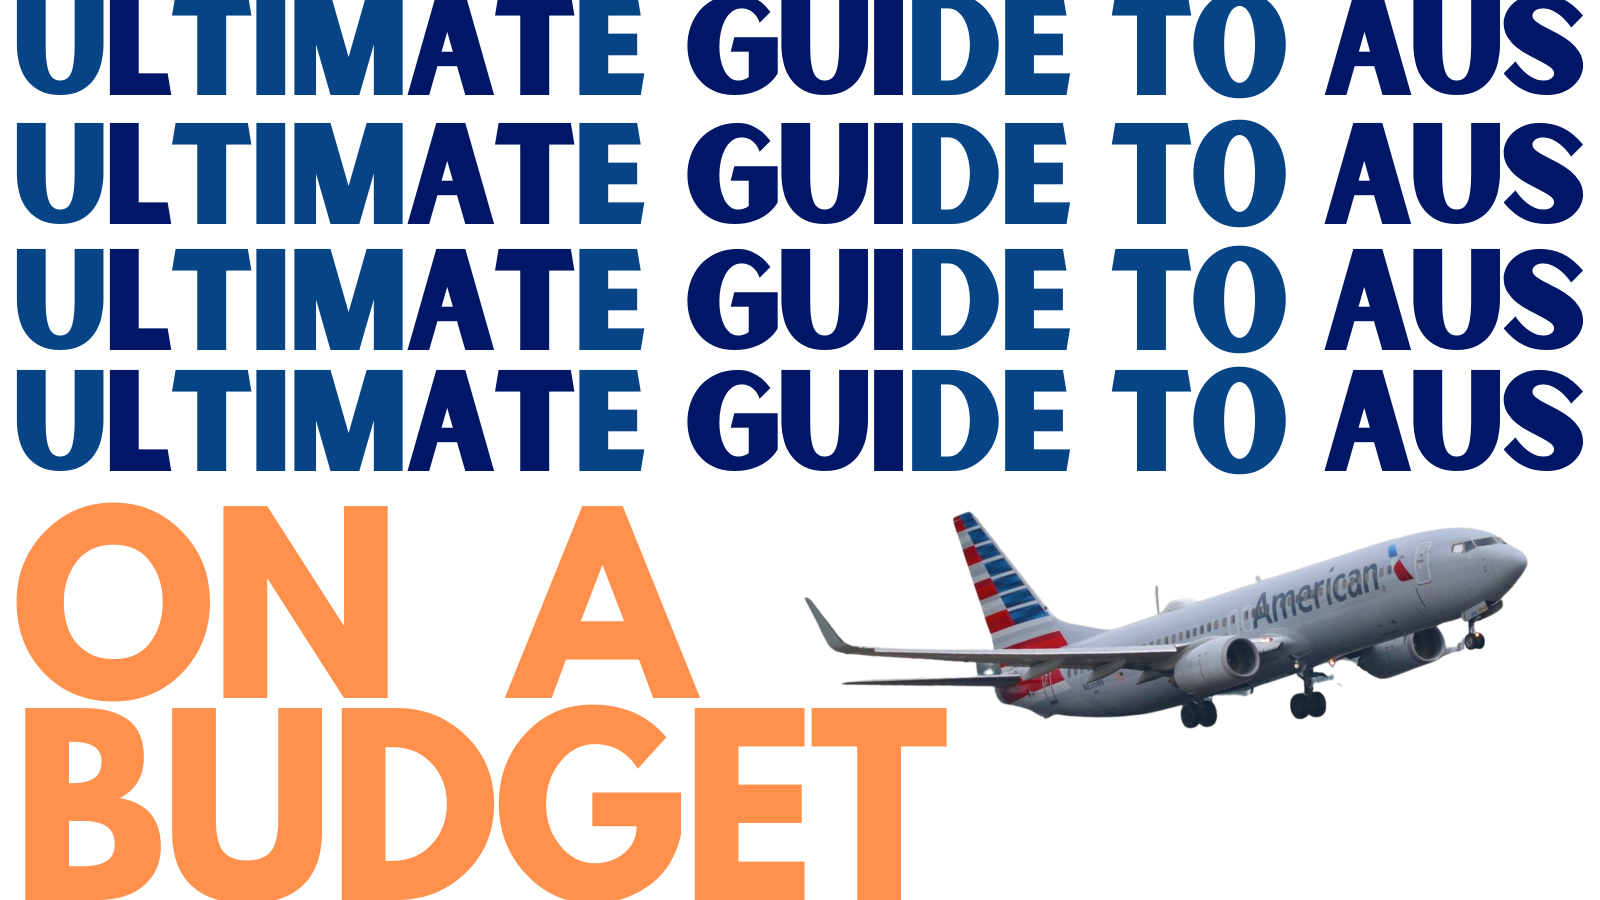 Text reads: Ultimate guide to AUS: On a budget. A plane is mid-air to the right.